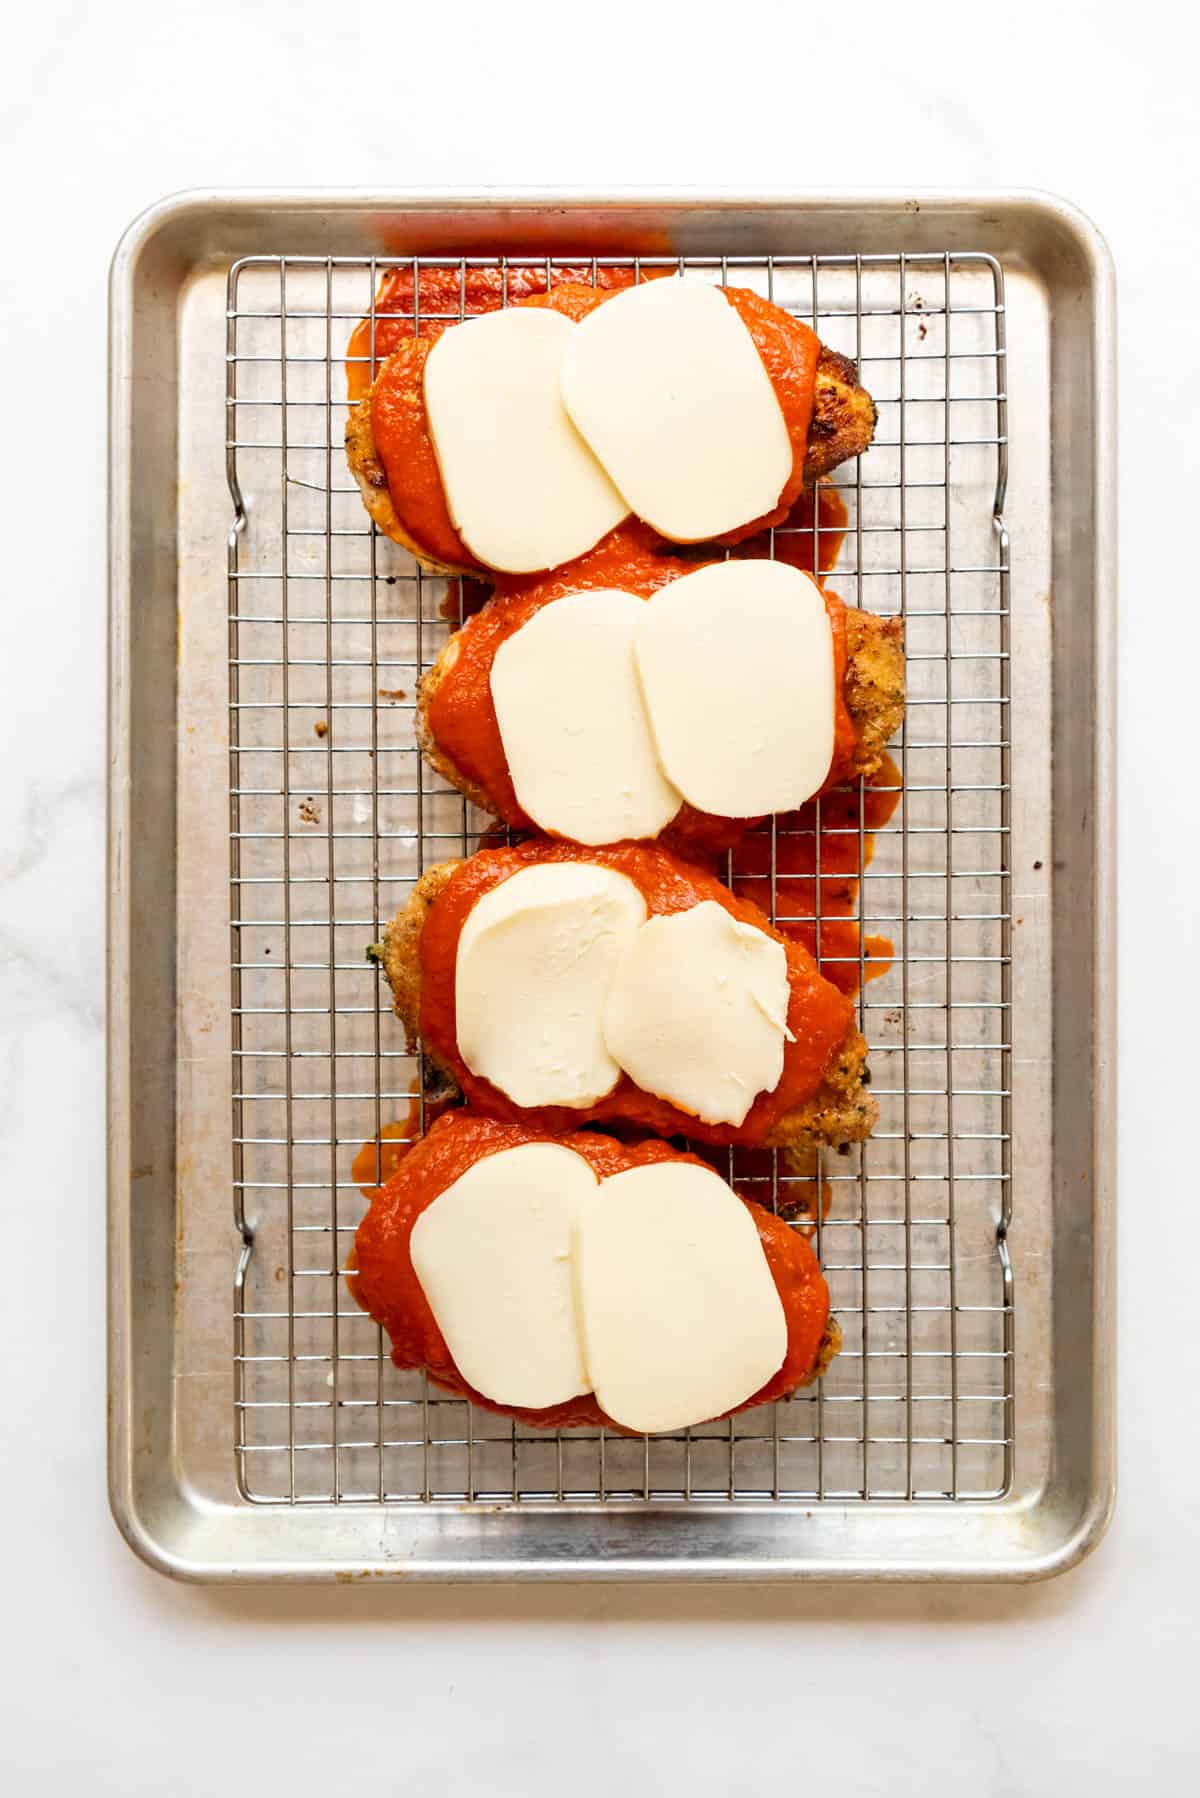 Adding slices of fresh mozzarella on top of chicken breasts and tomato sauce to make chicken parmesan.